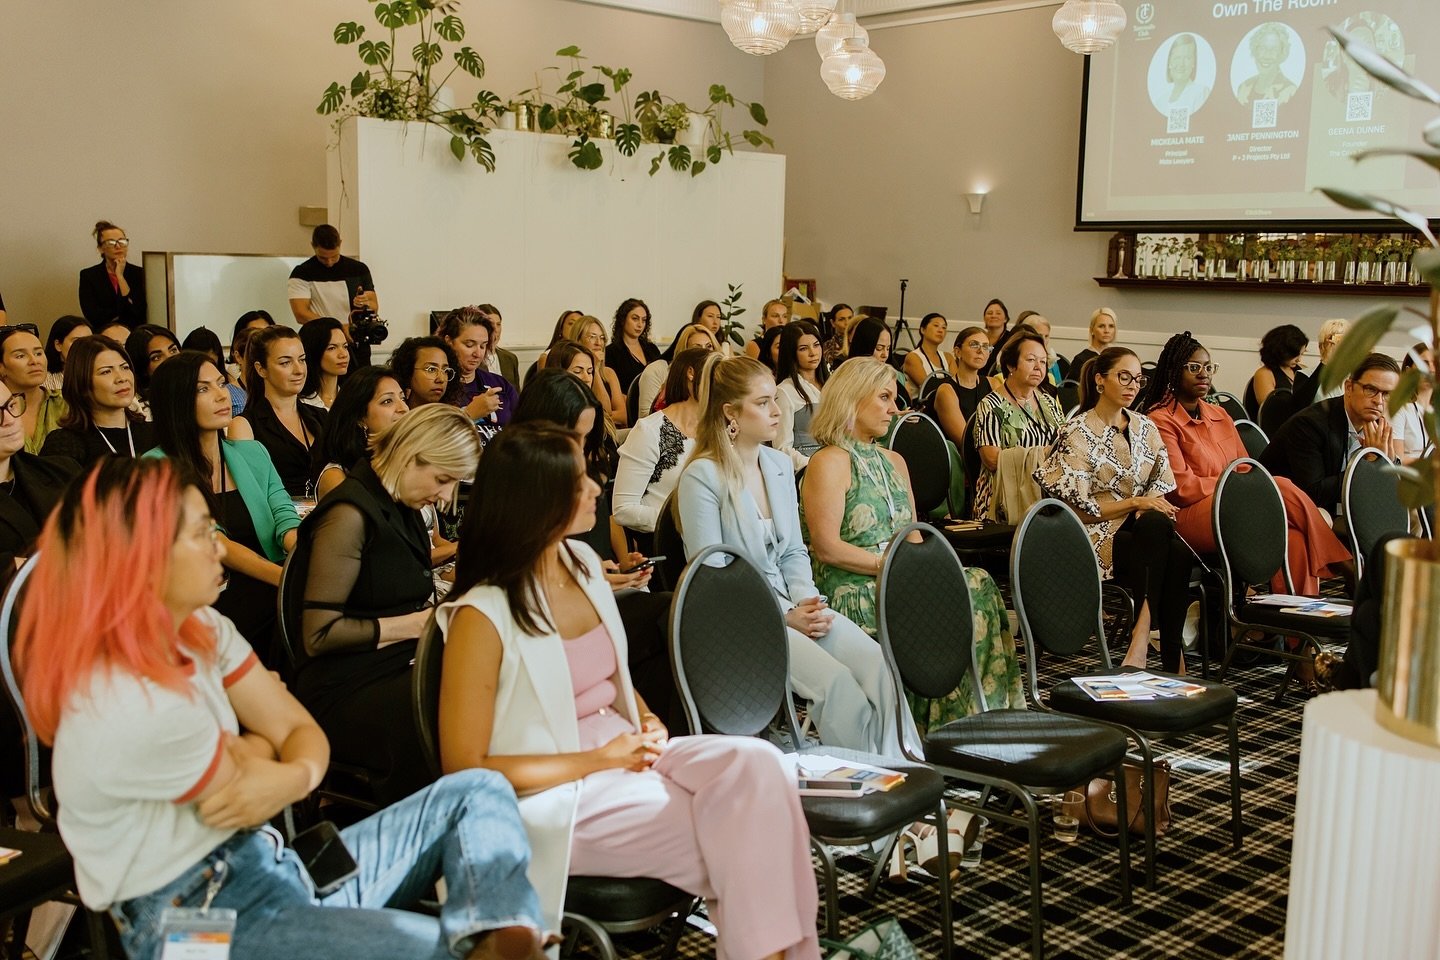 Tag a friend who you want to attend the next @womenwhoinnovate event with! ✨